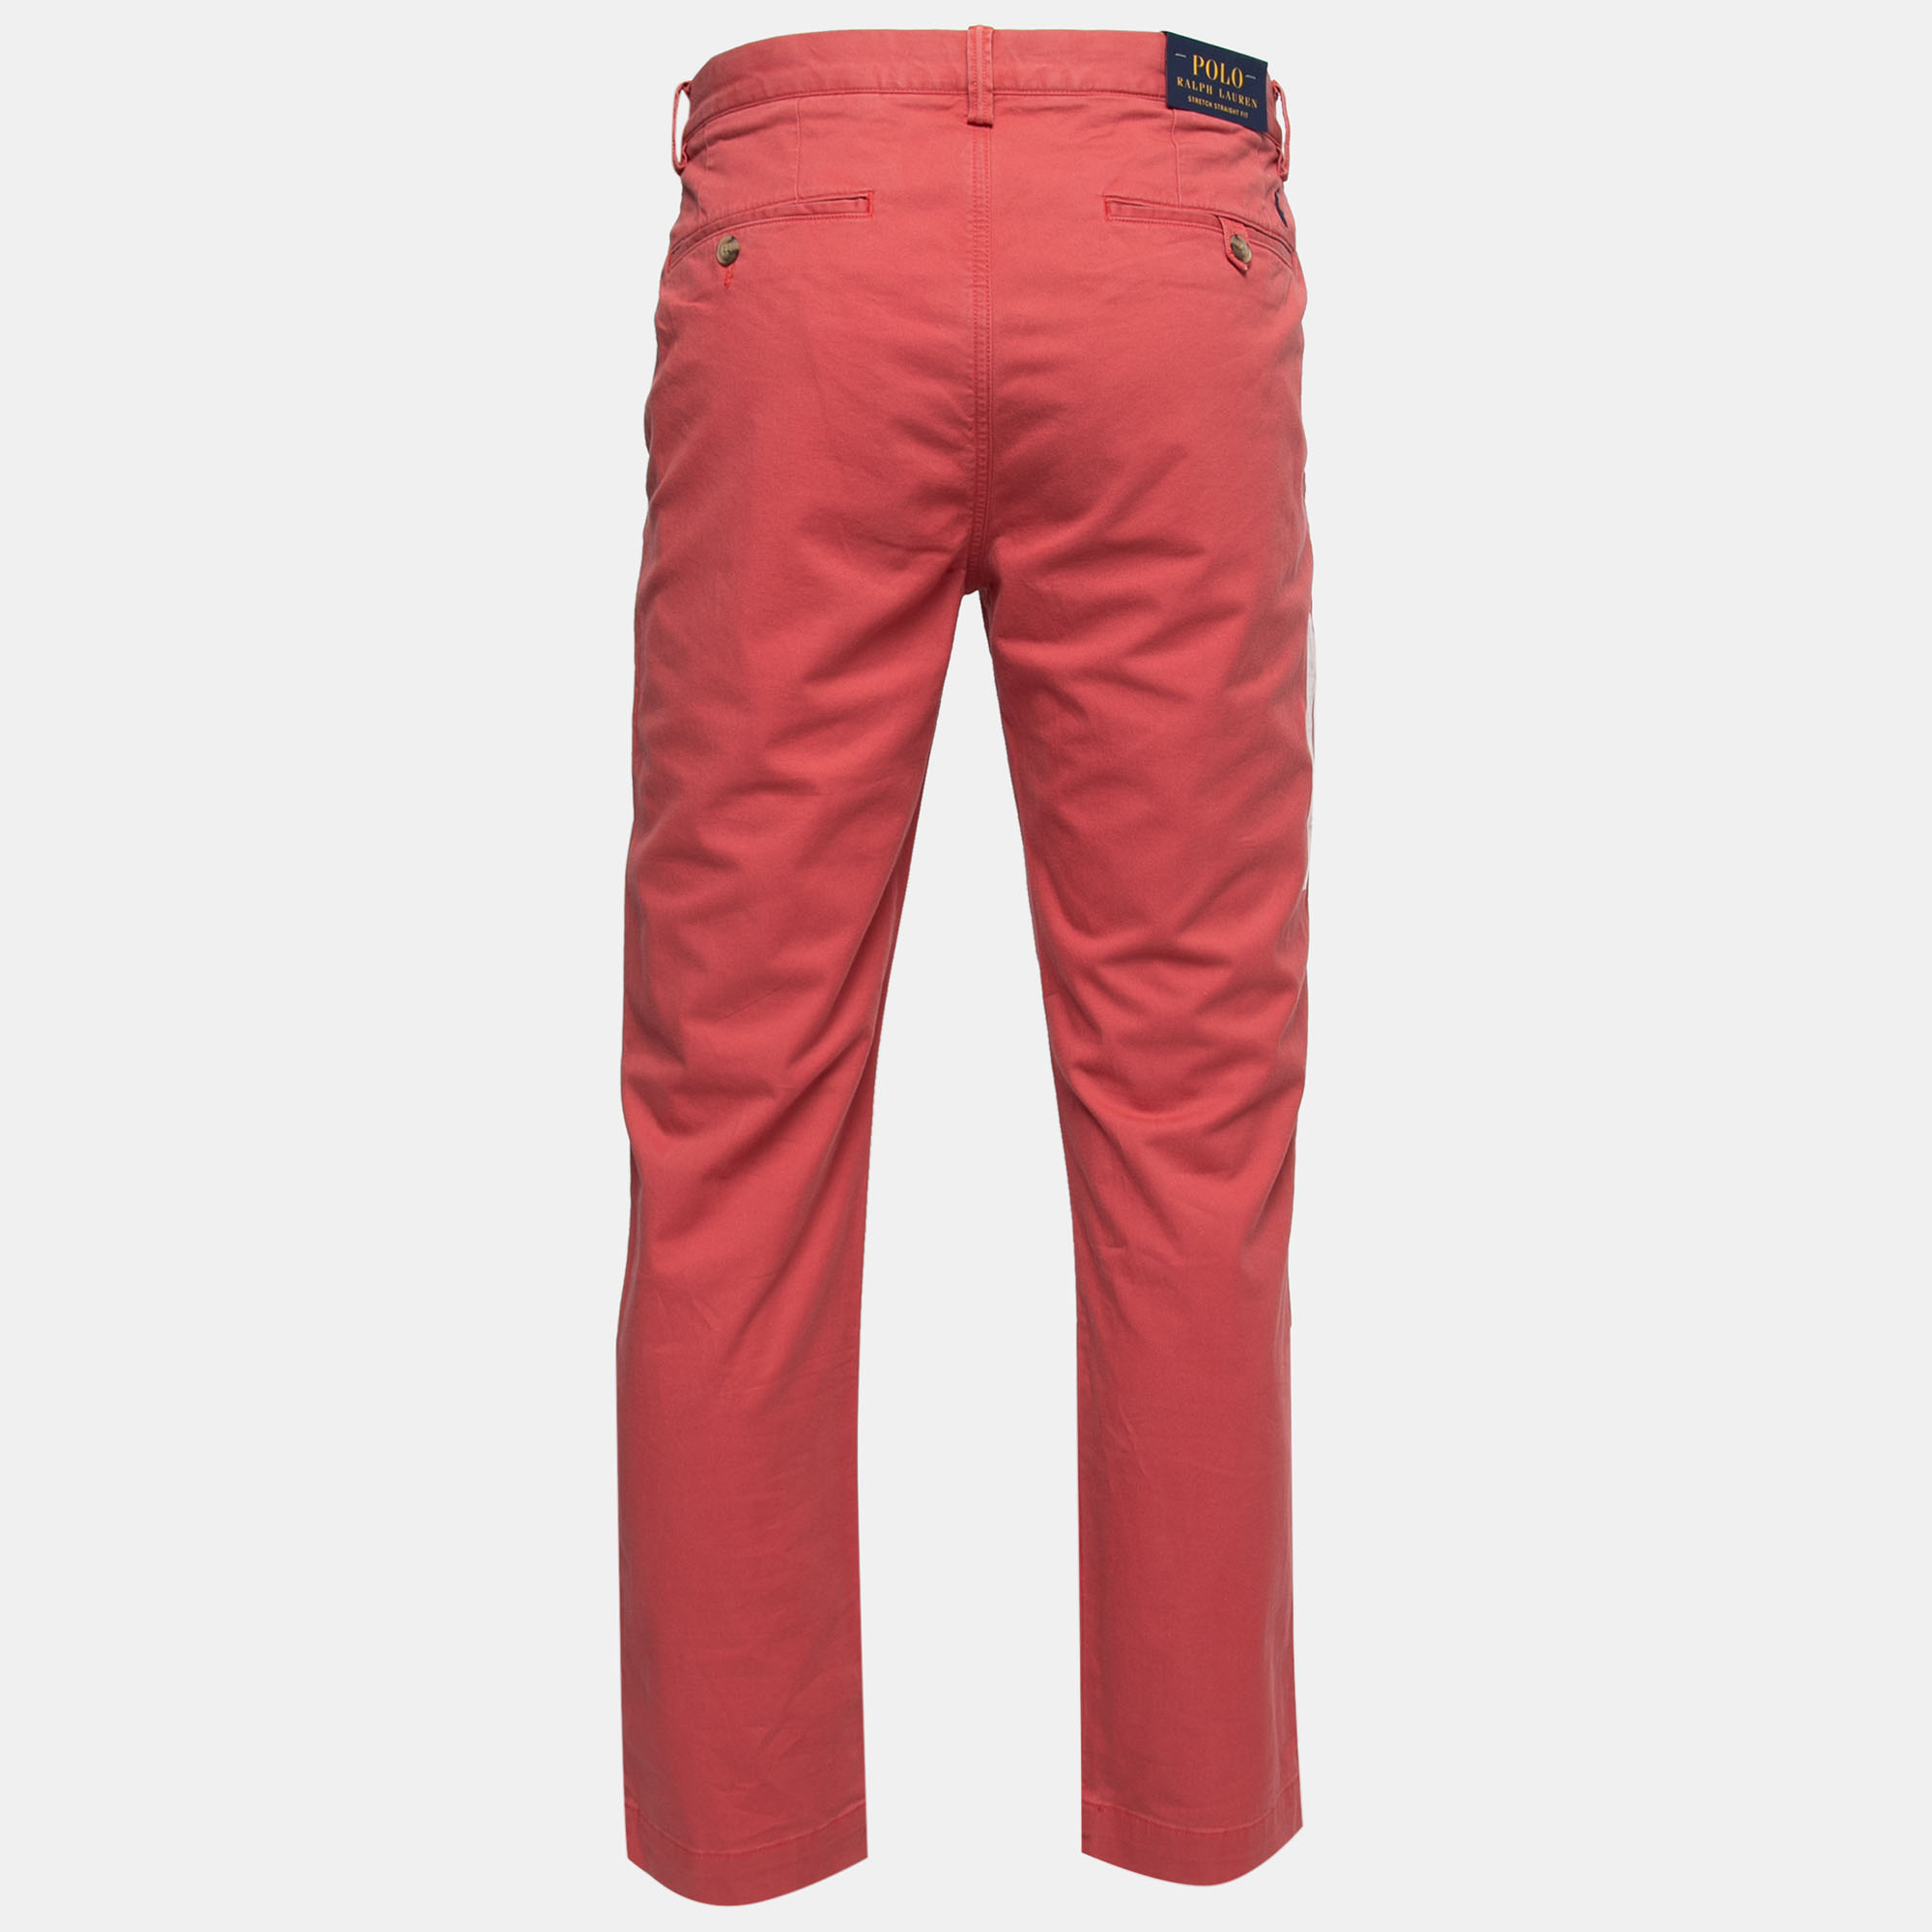 Pre-owned Polo Ralph Lauren Red Cotton Twill Chino Trousers L